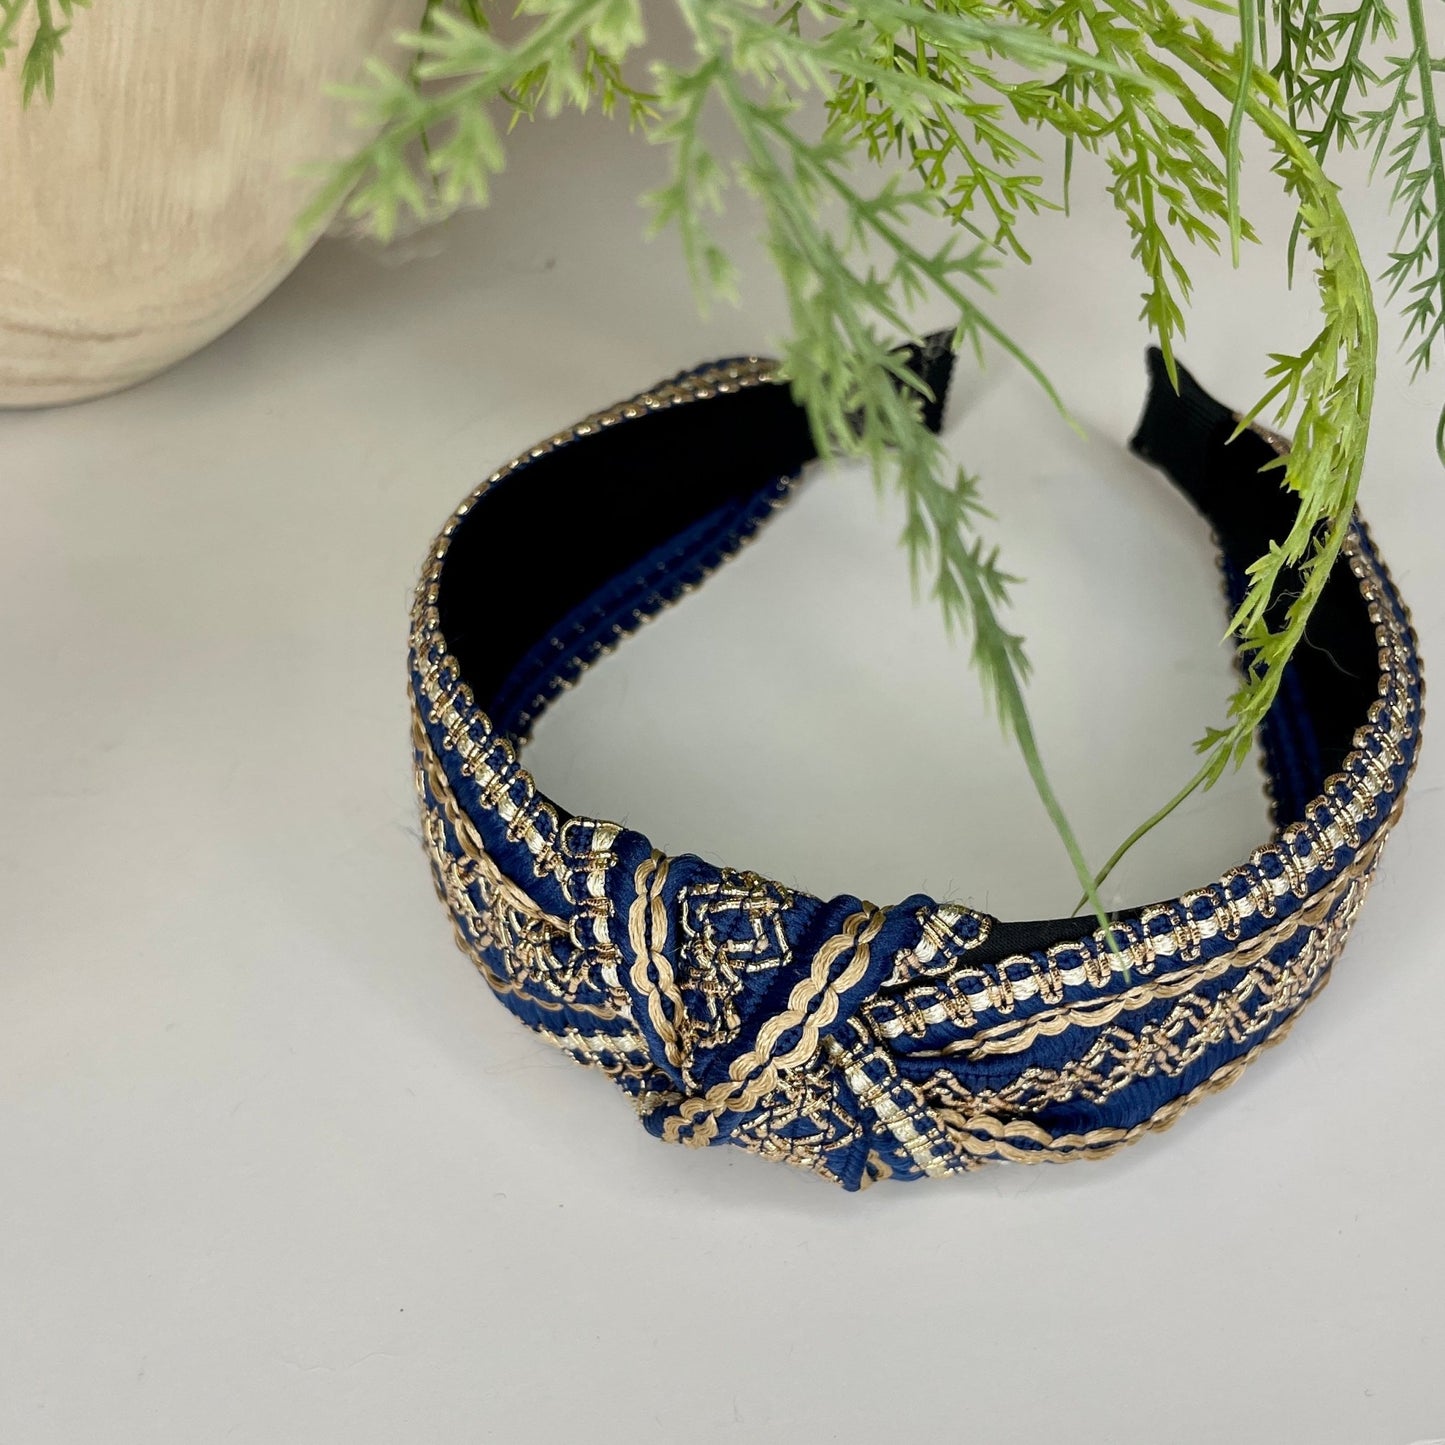 Navy with Gold Delicately Stitched Knot Headband - Gray Bird Label